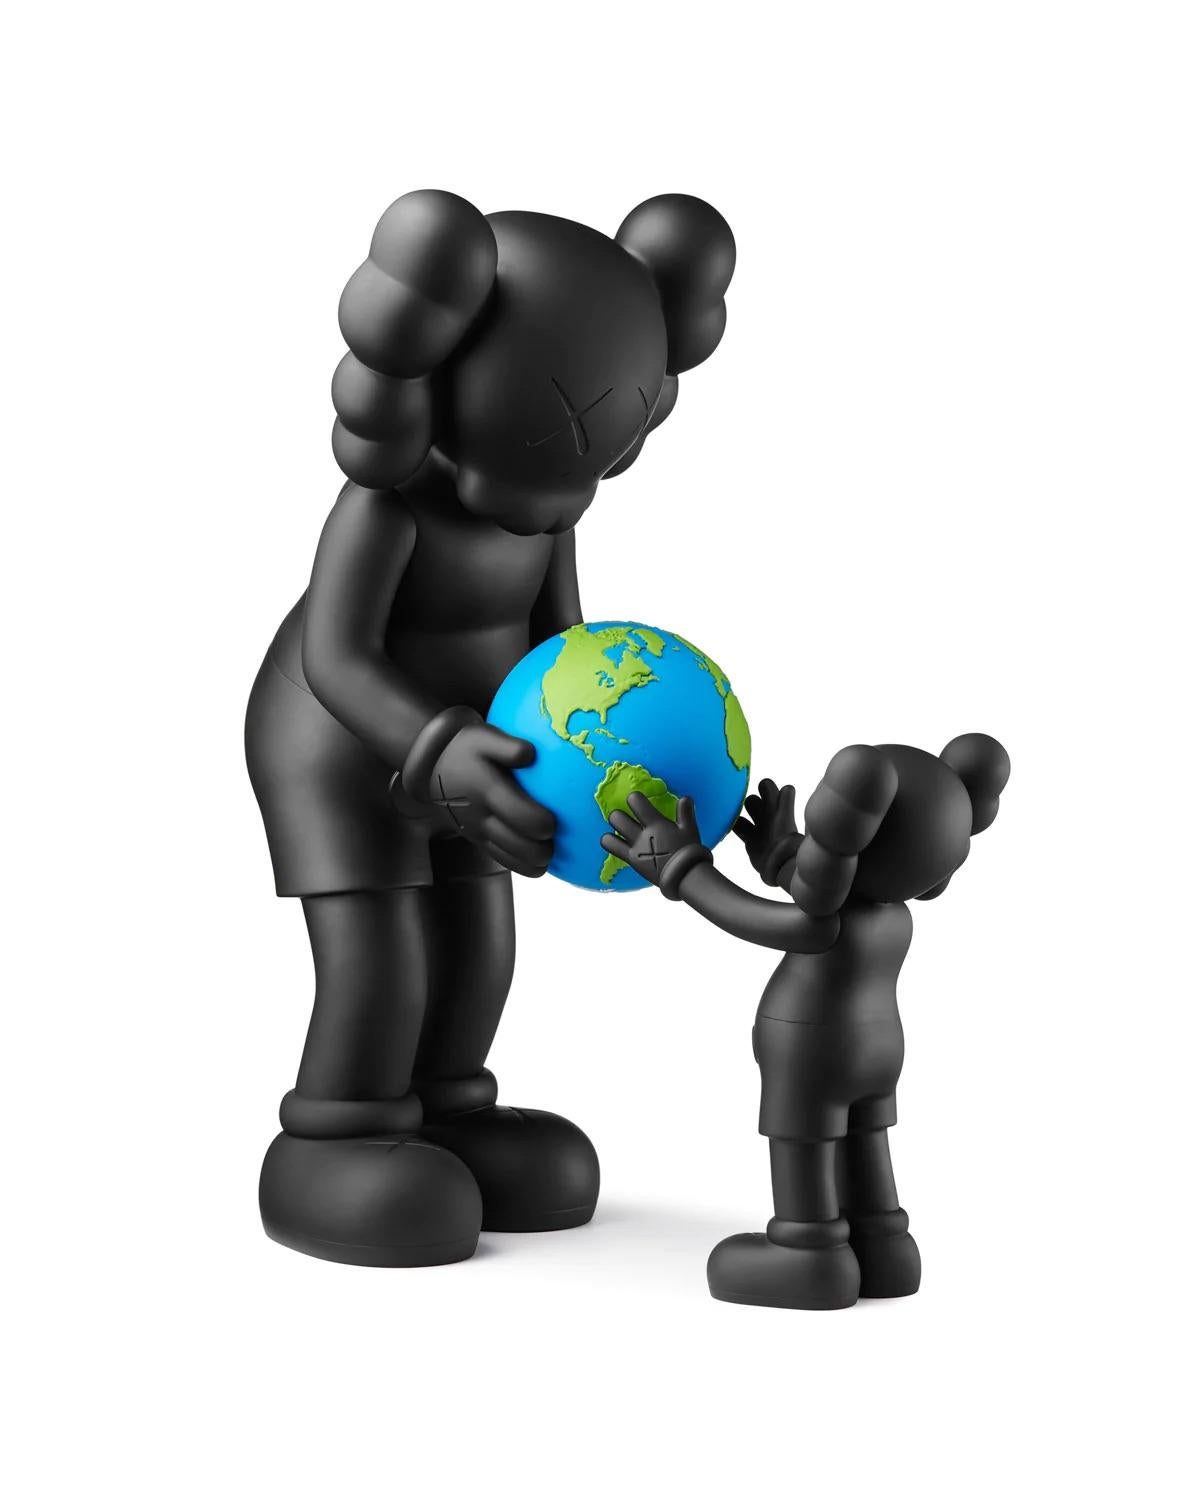 KAWS The Promise (black):
A unique KAWS Companion featuring a blue & green globe being affectionately shared between parent & child. This timeless, highly collectible KAWS art toy was published on the occasion of: The Promise art installation at